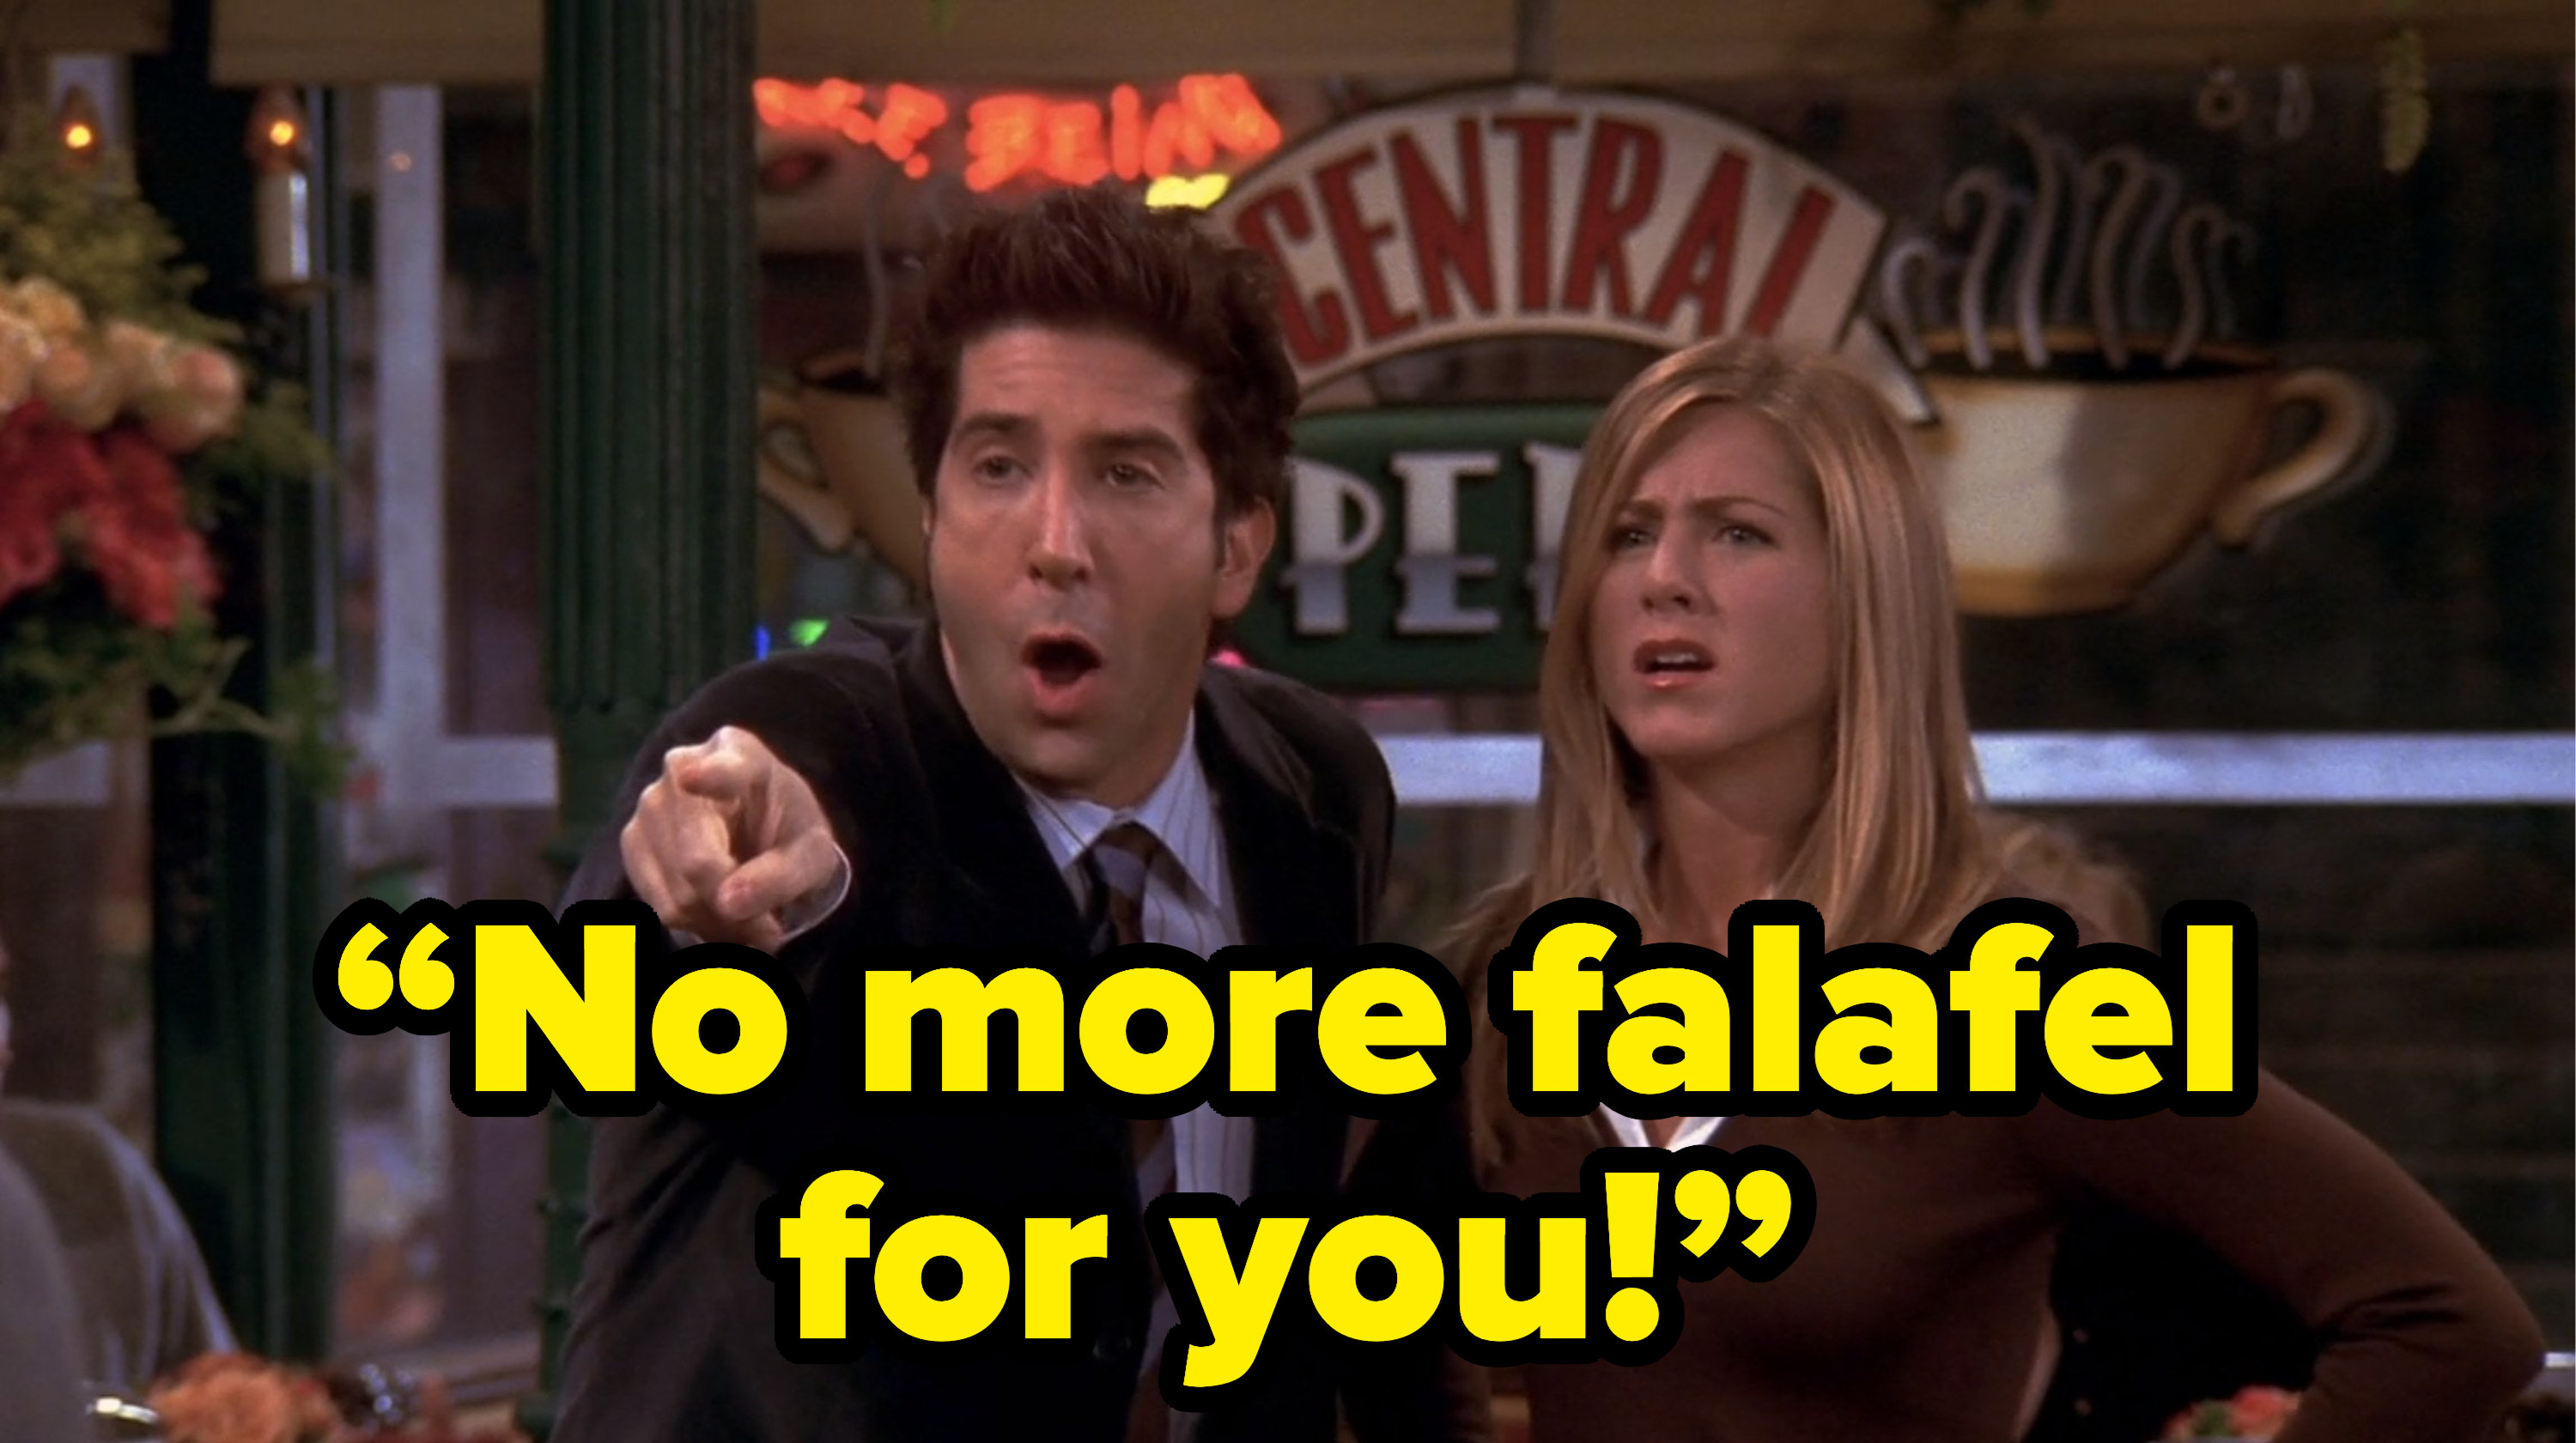 ross yelling “No more falafel for you!” at rachel&#x27;s sister amy on friends